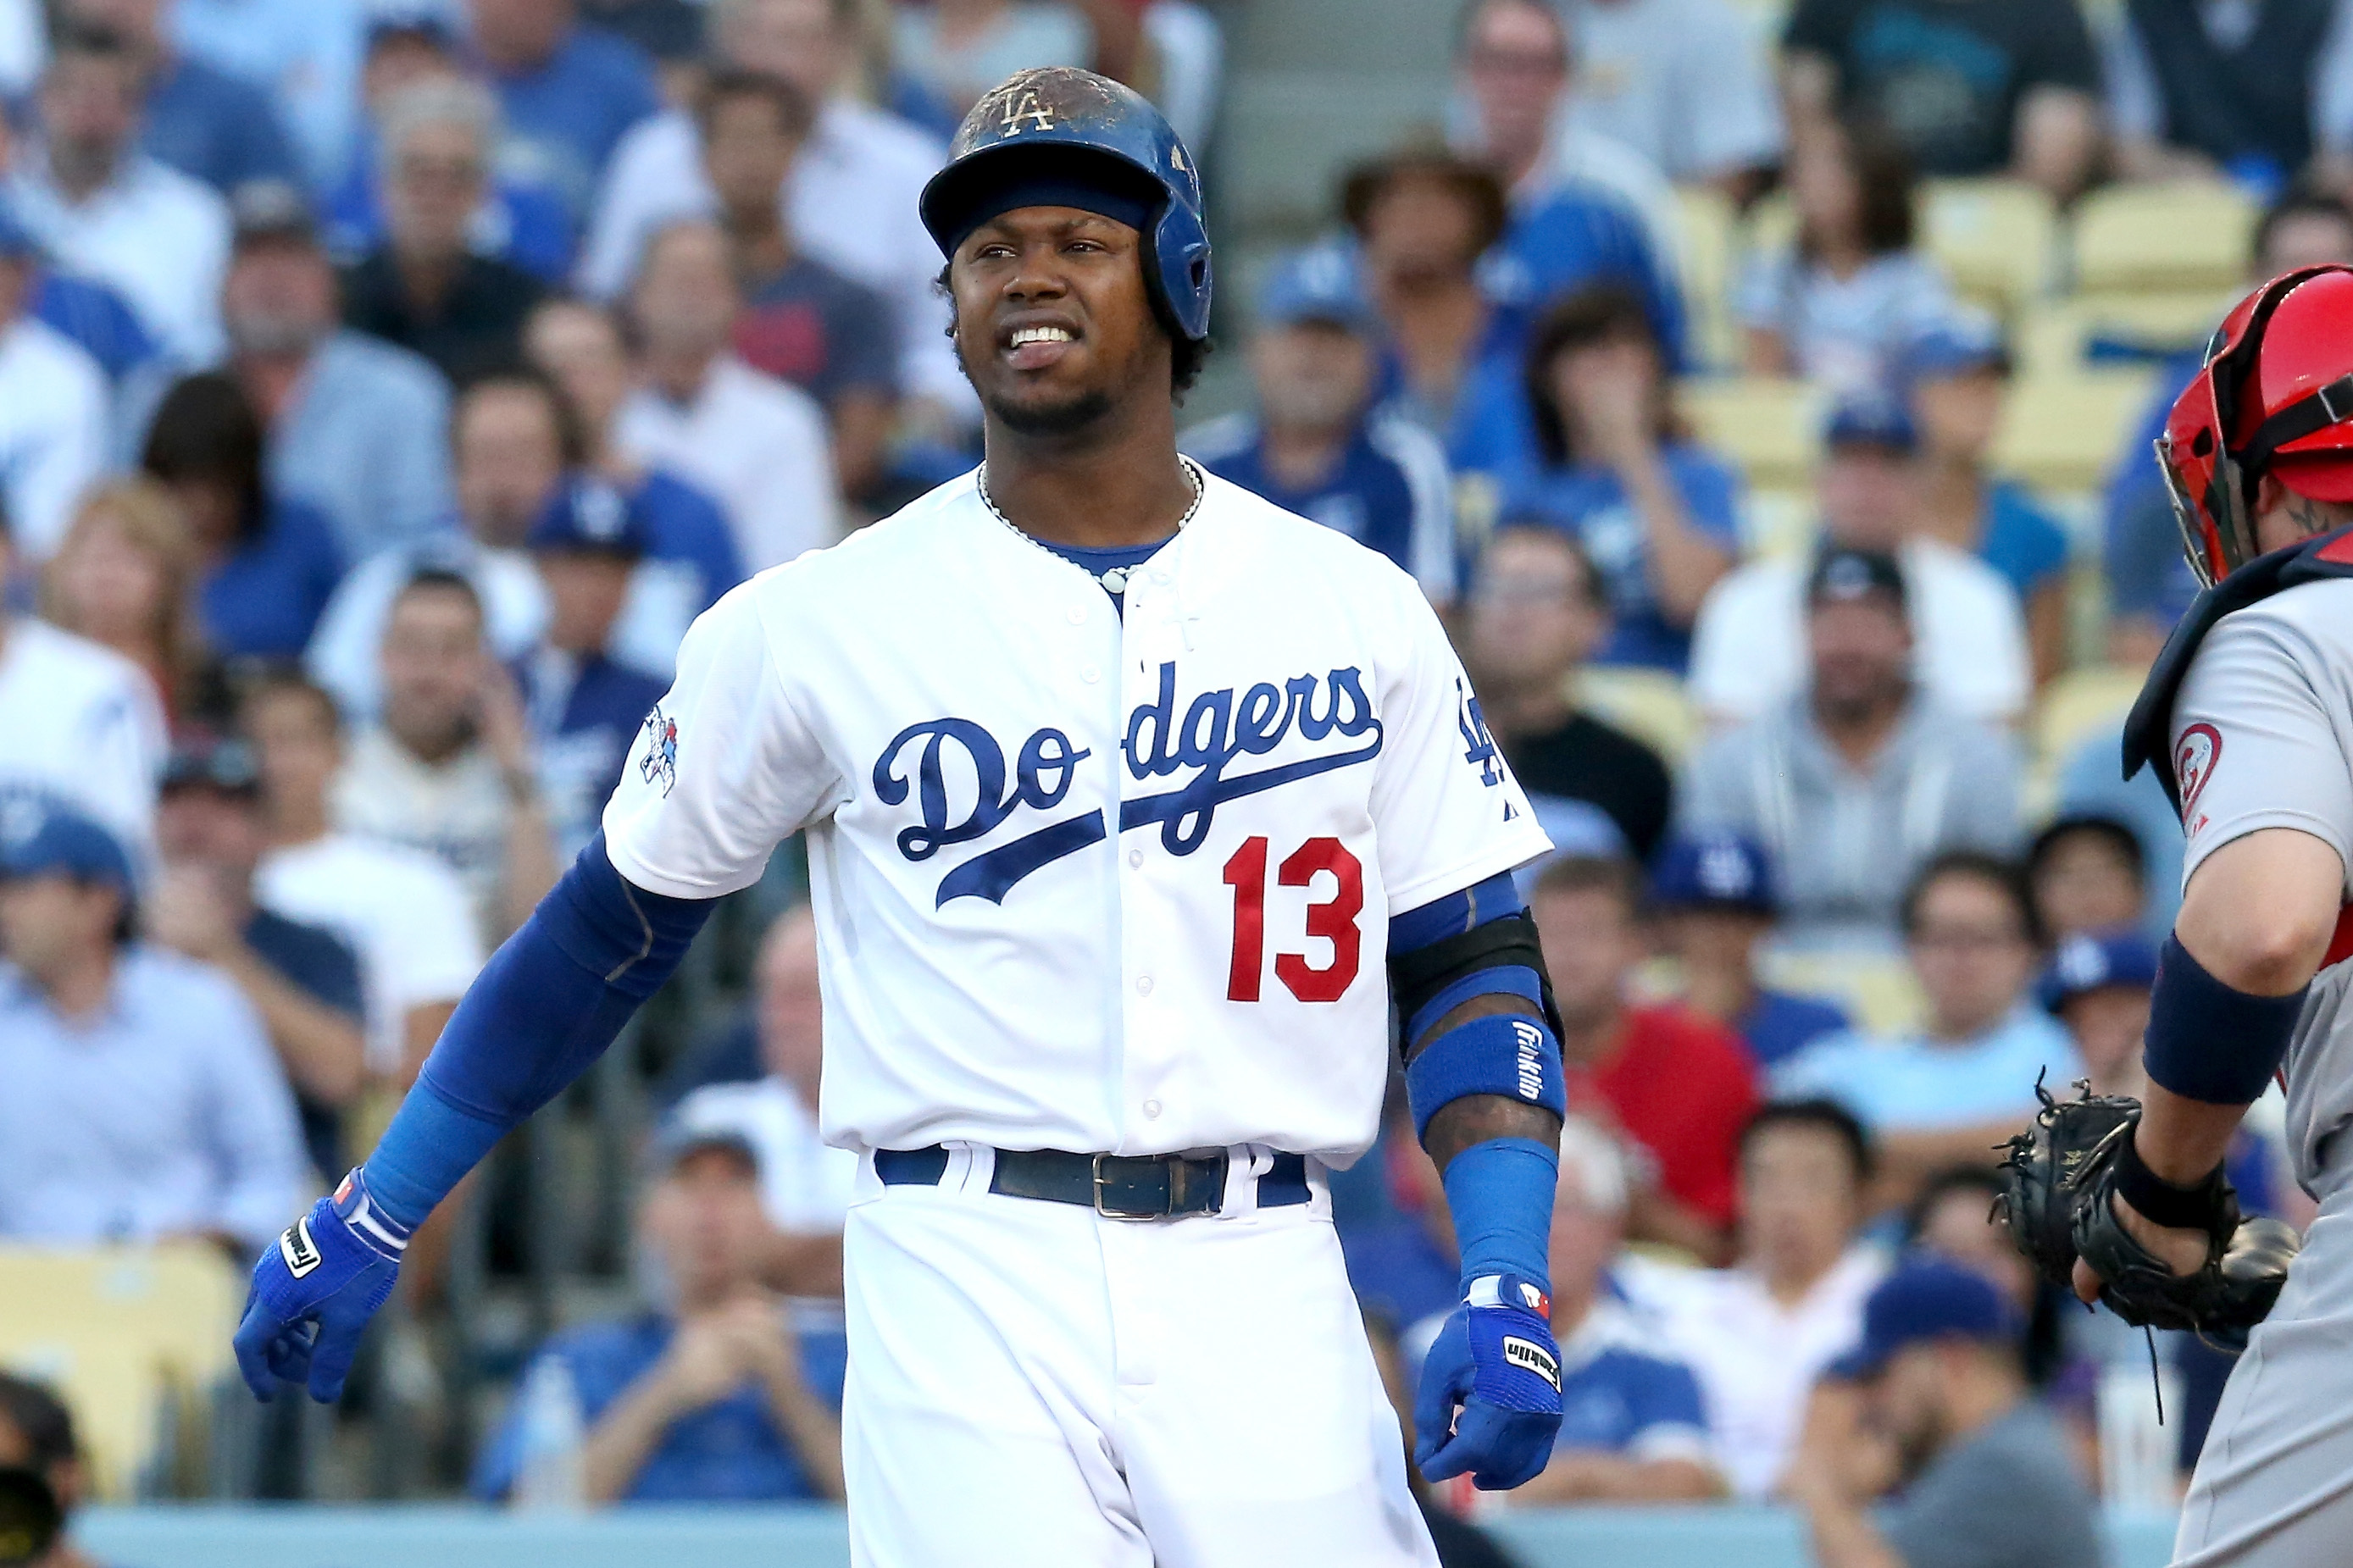 Sky is not falling for Dodgers after Hanley Ramirez injury